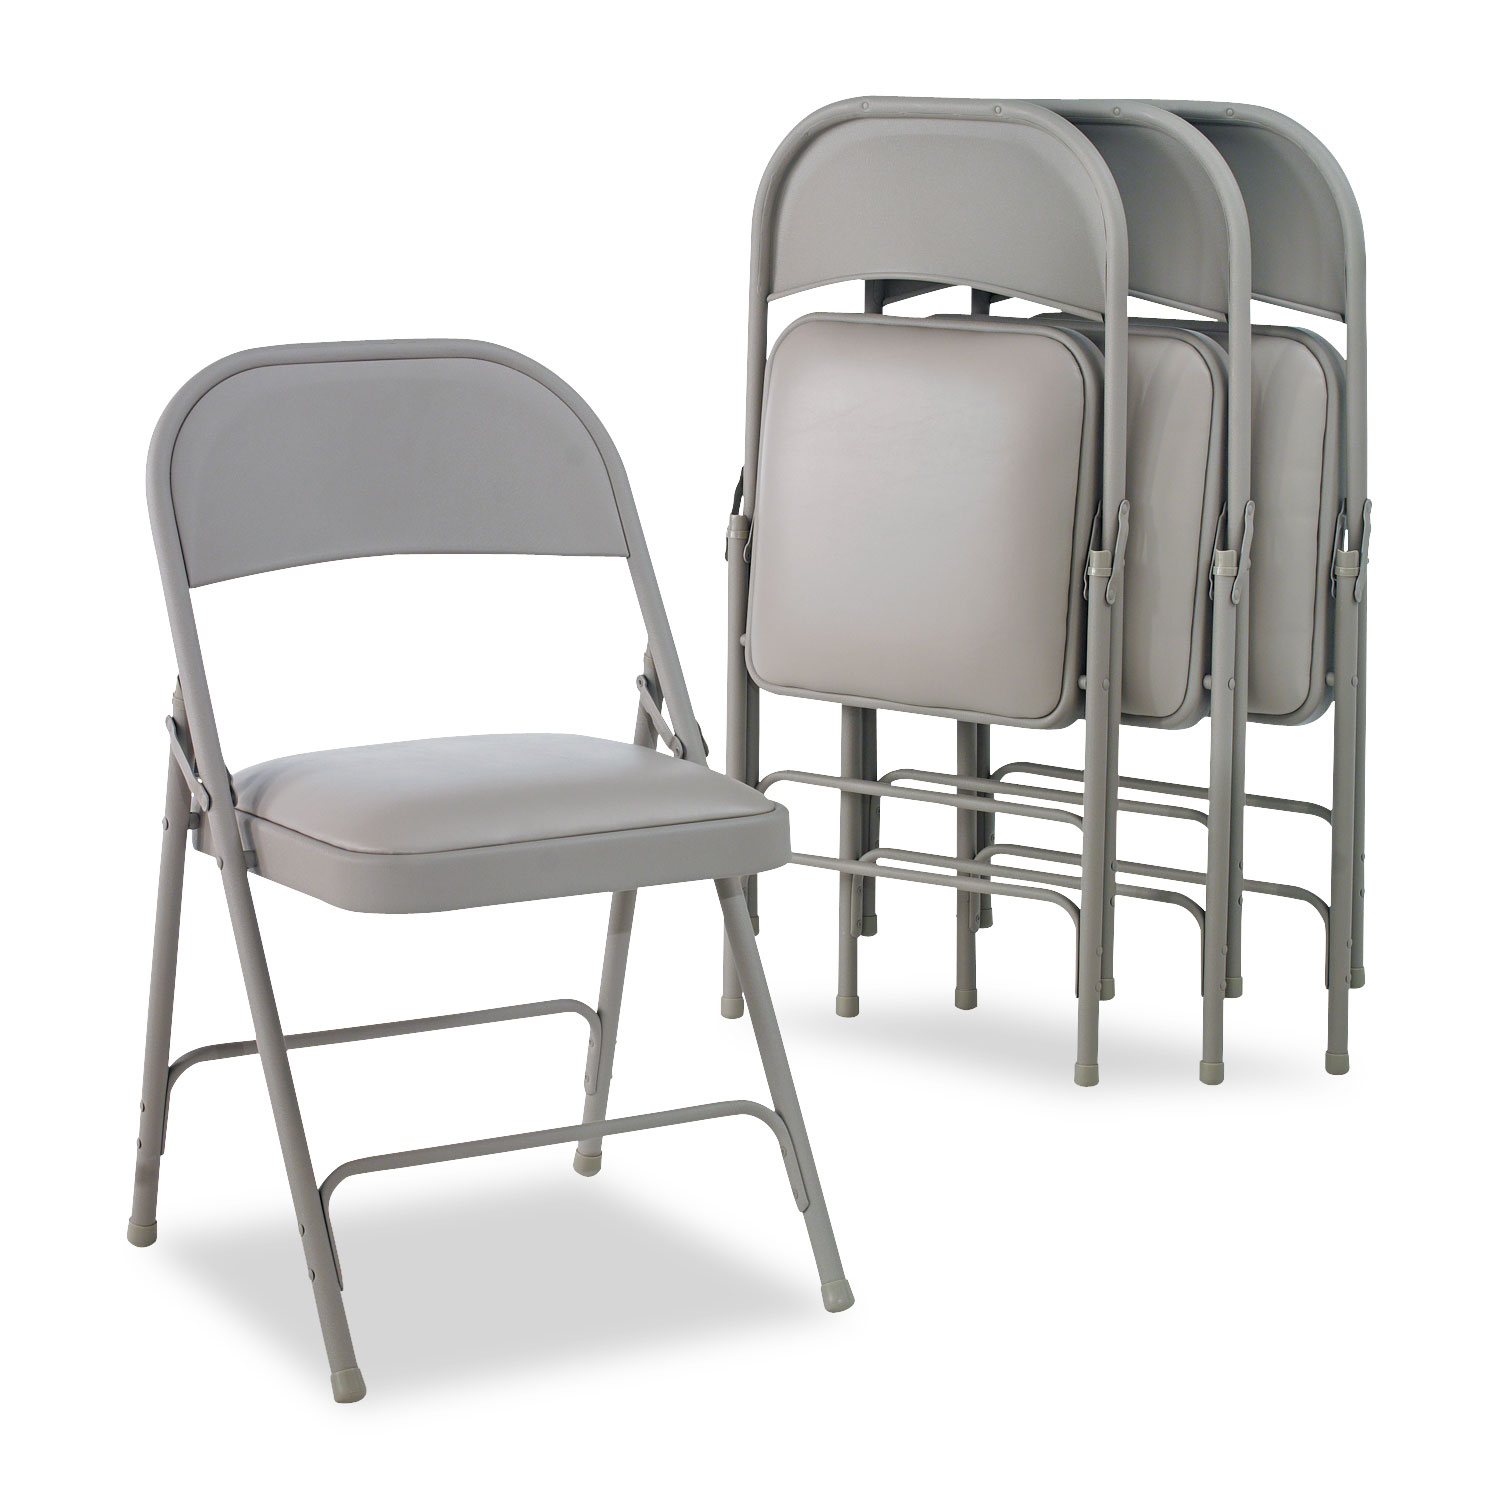 Steel Folding Chair with Two-Brace Support, Padded Seat, Light Gray, 4/Carton